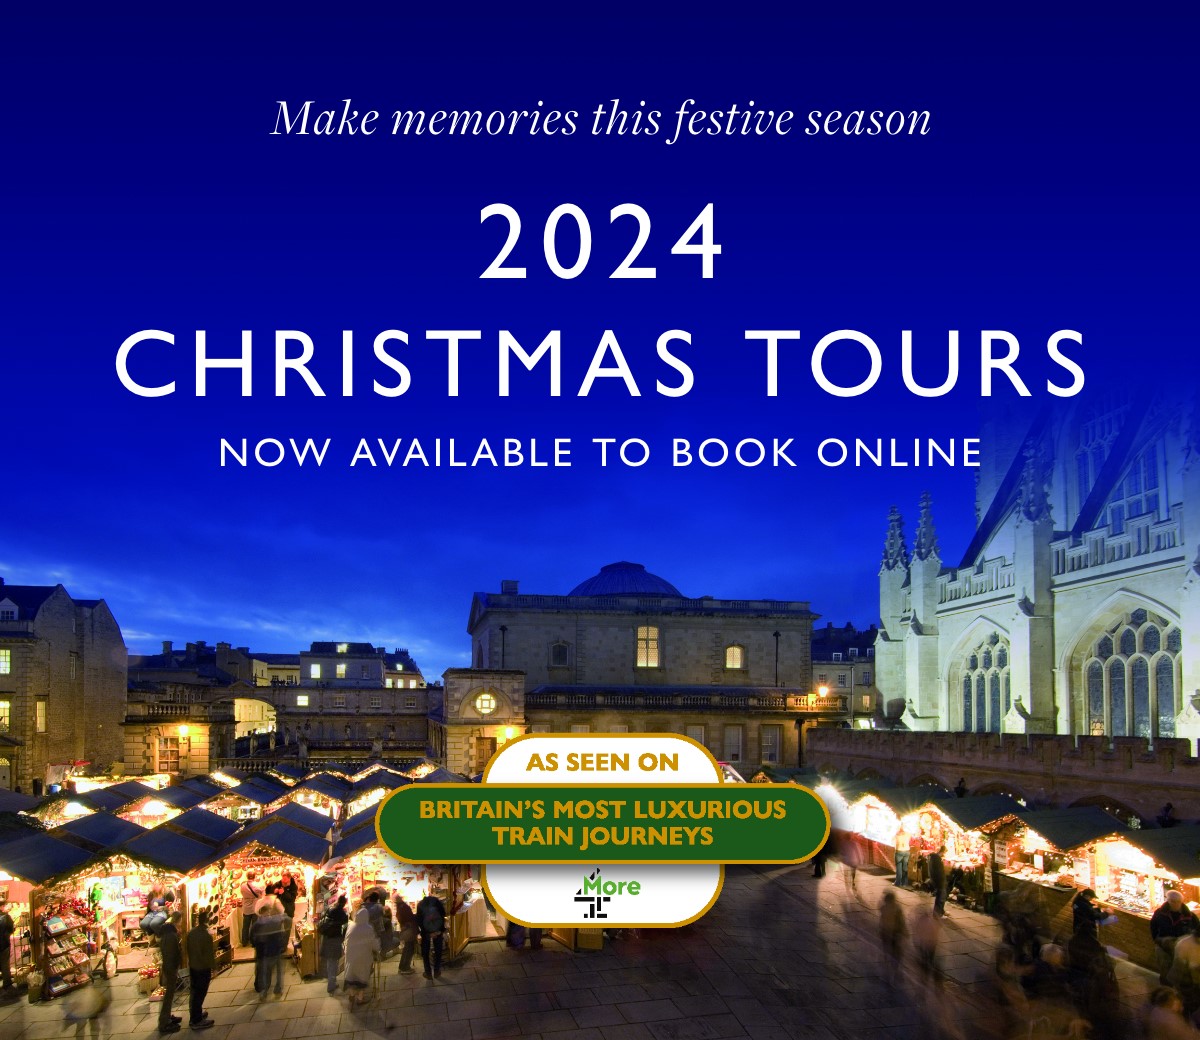 Our famous festive Midland Pullman and Saphos Train tours to Edinburgh, York and Bath, to visit the fabulous Christmas markets are now available to book online... Midland Pullman - midlandpullman.com Saphos Trains - saphostrains.com